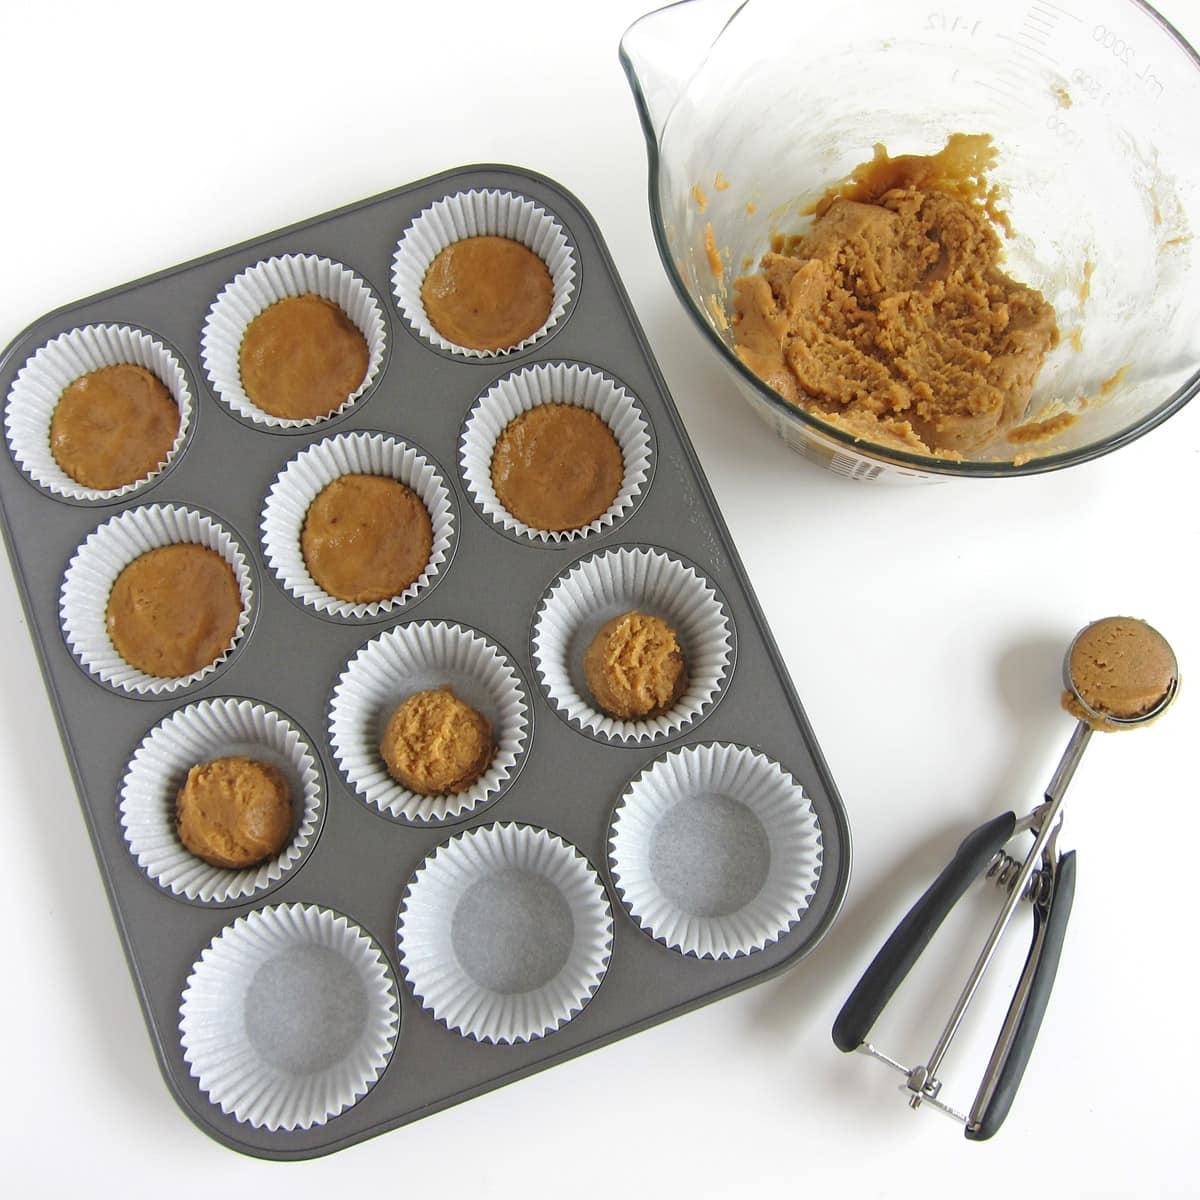 Cookie dough scoops in cupcake wrappers in a cupcake pan.